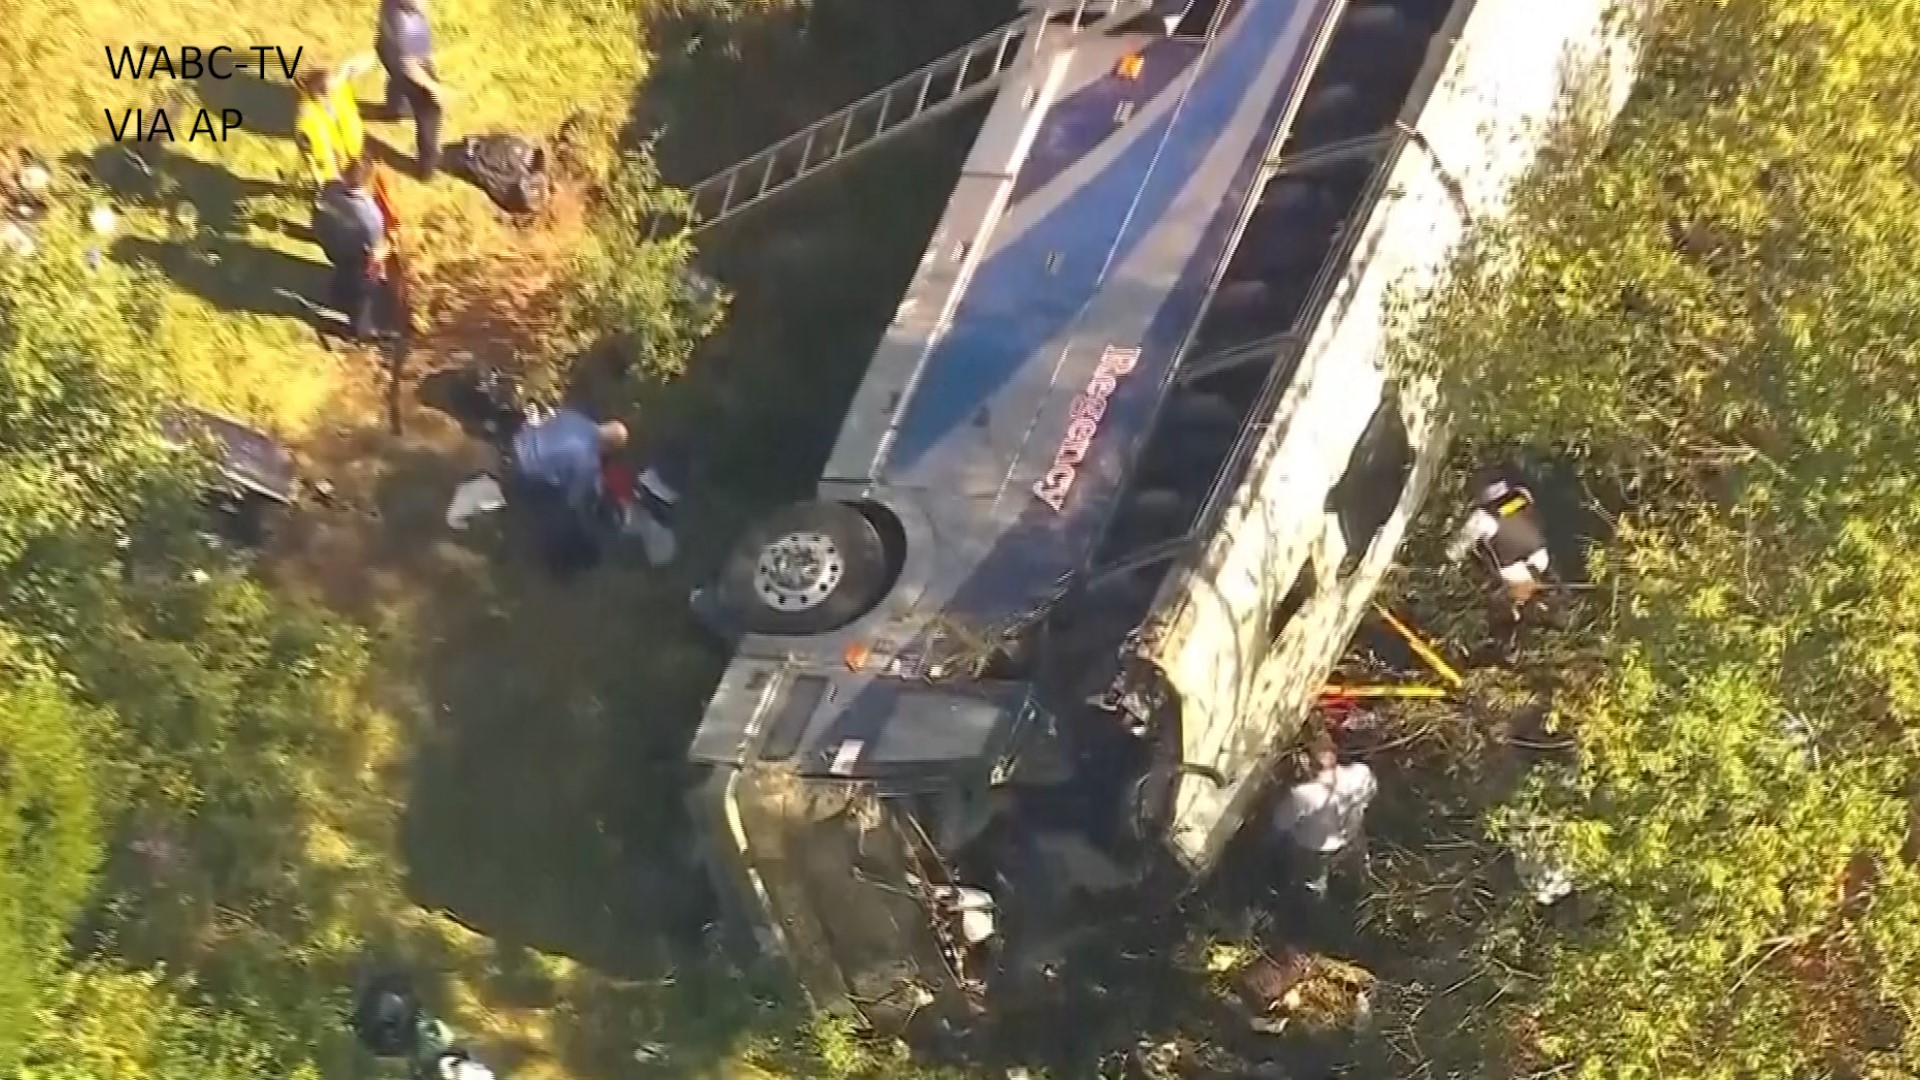 A charter bus carrying high school students to a band camp veered off a New York highway and tumbled down an embankment Thursday, killing two adults.